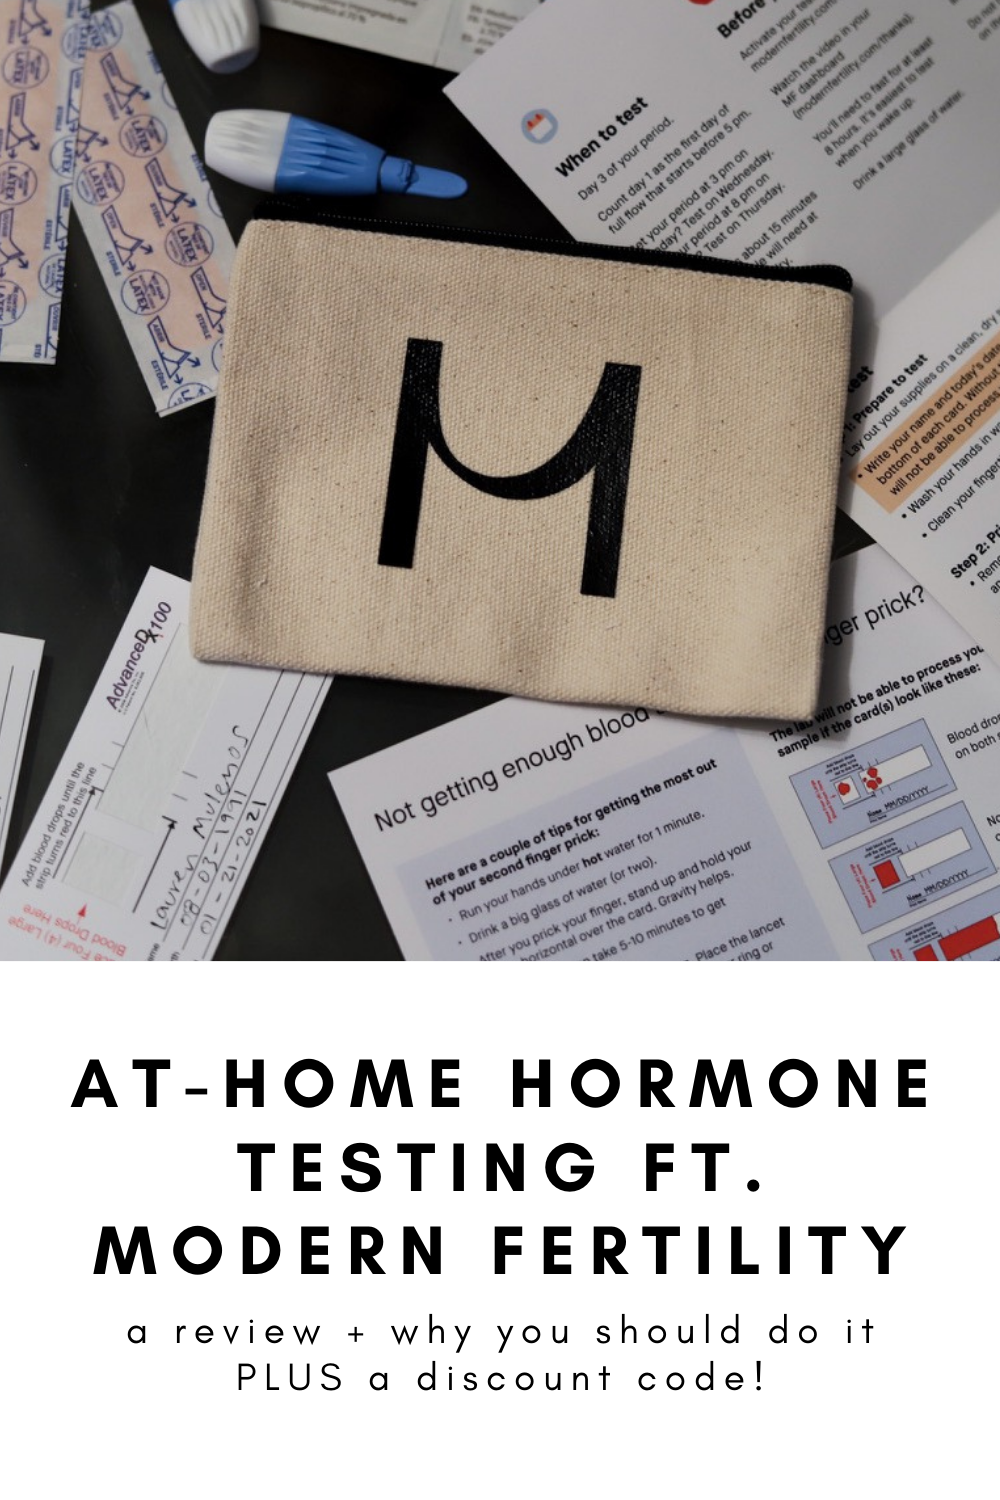 at-home hormone testing featuring modern fertility, modern fertility discount code, fertility test  options that are budget friendly, how to test for amh cheaper, lments of style, la blogger, is modern fertility worth it, accurate, blood test, how m…